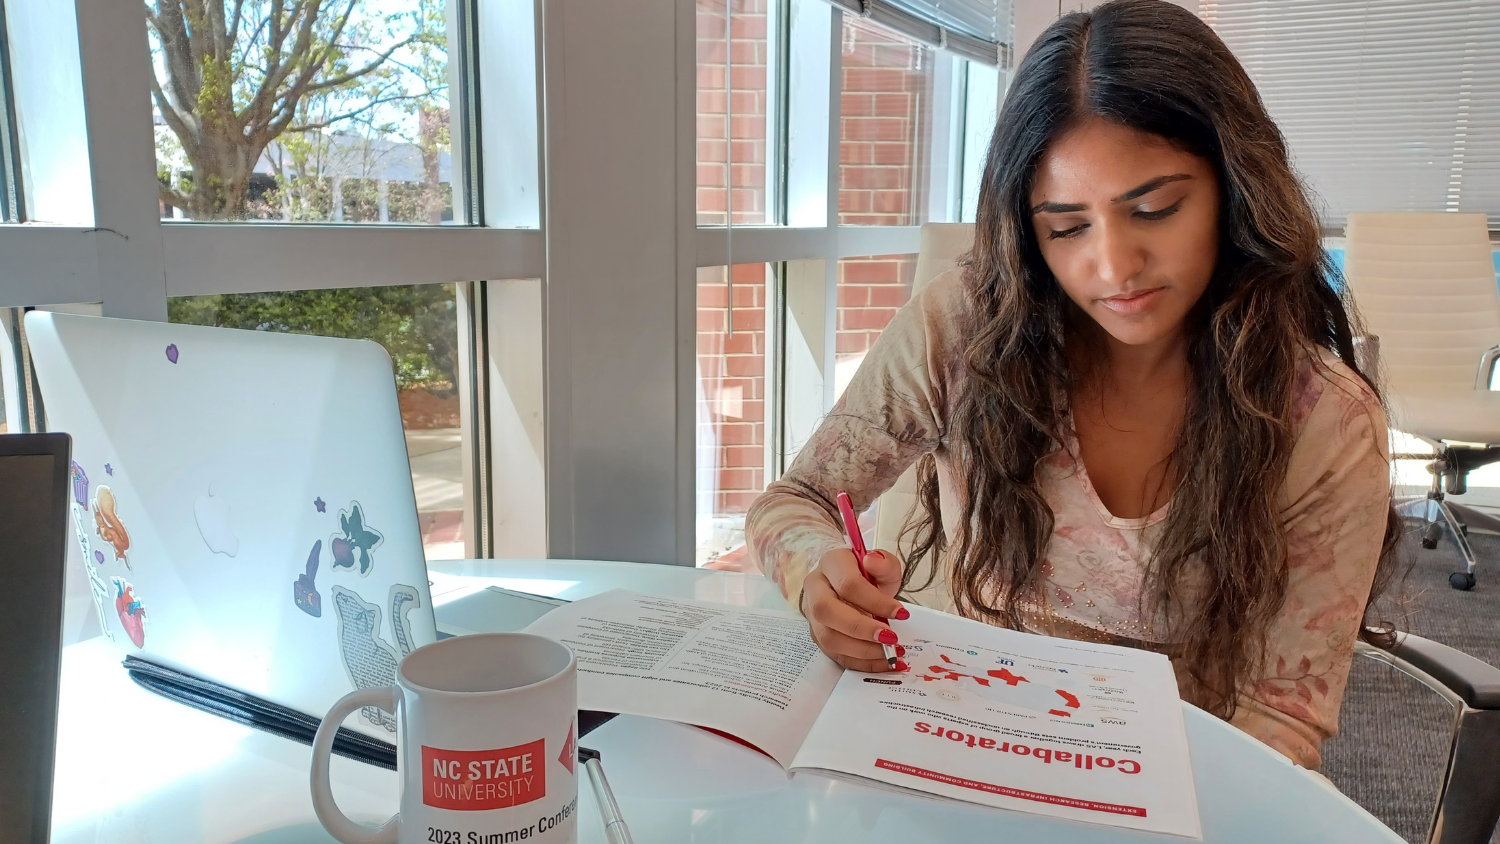 A student with long dark hair holds a pen and reads the impact report. The student's computer and a mug are also on the table. Windows next to the table show brick buildings and trees.